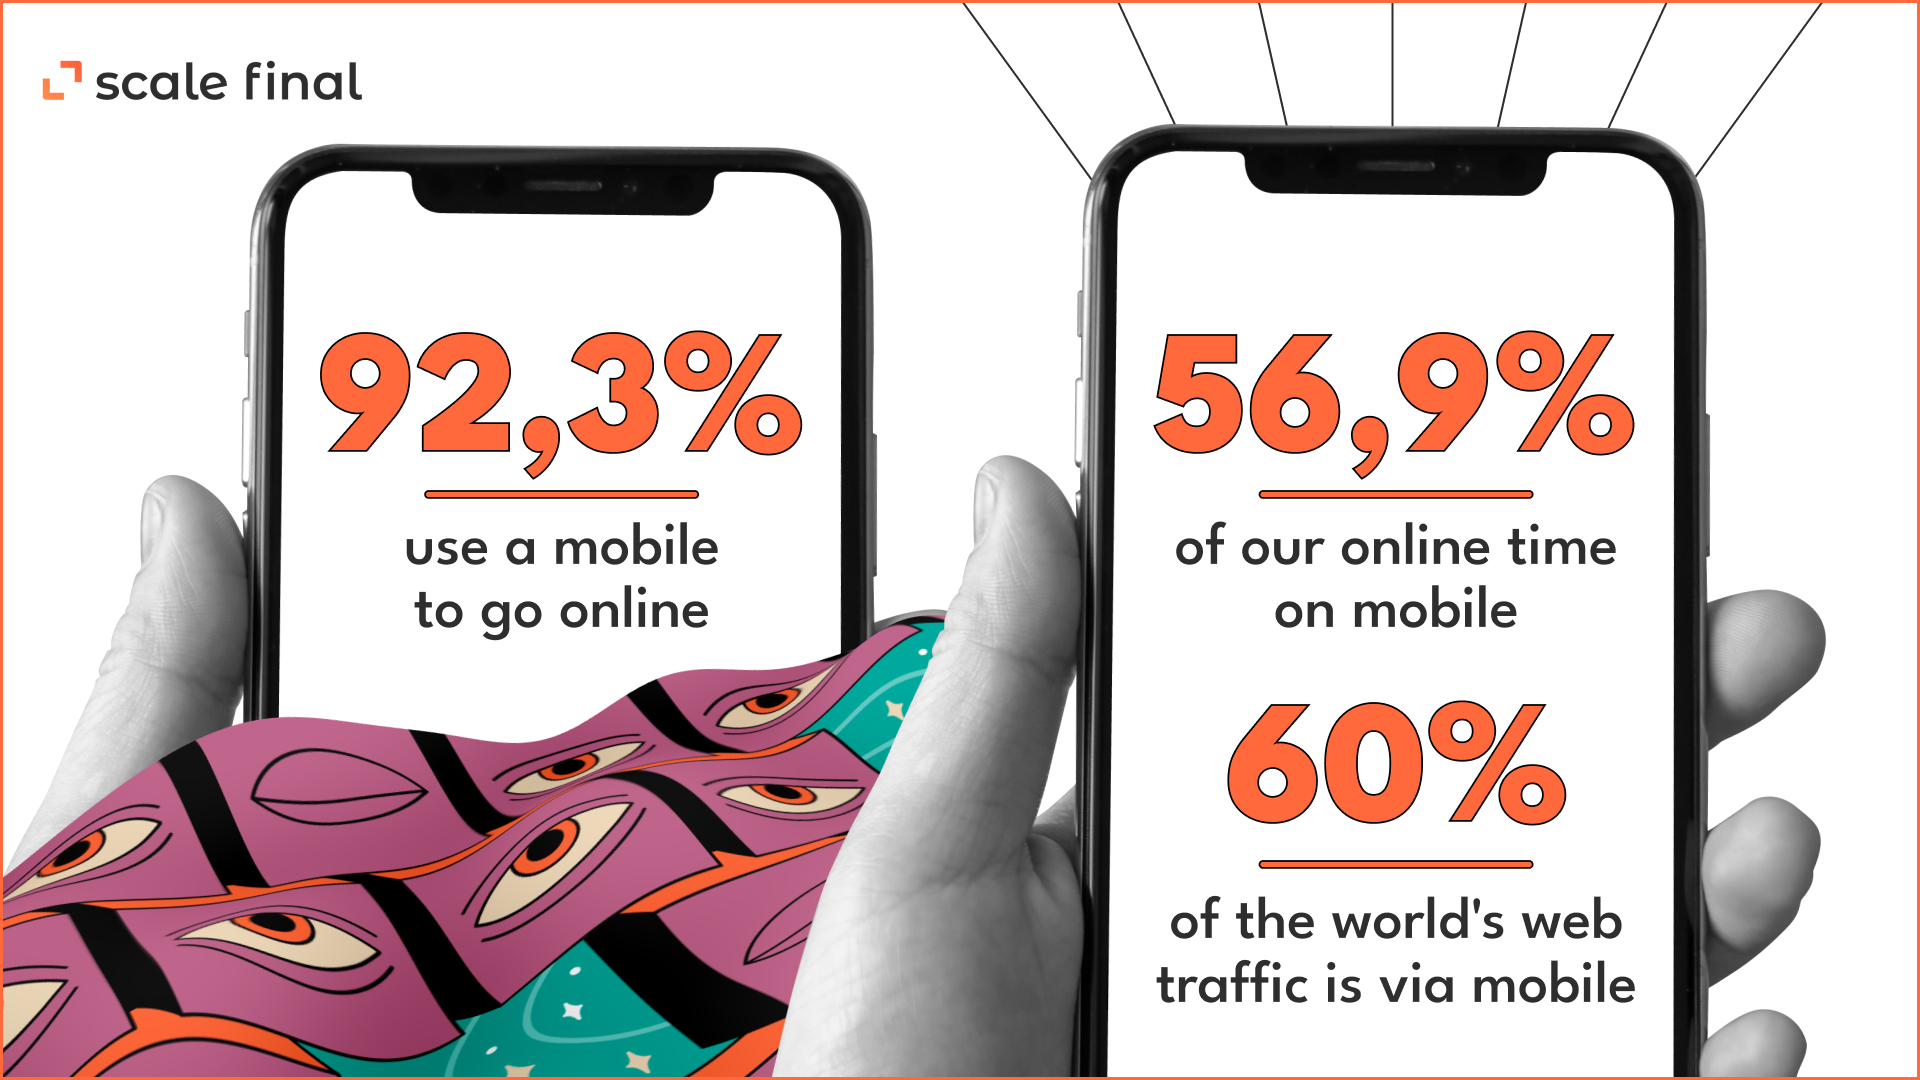 92.3% use a mobile to go online,56.9% of our online time on mobile60% of the world's web traffic is via mobile 